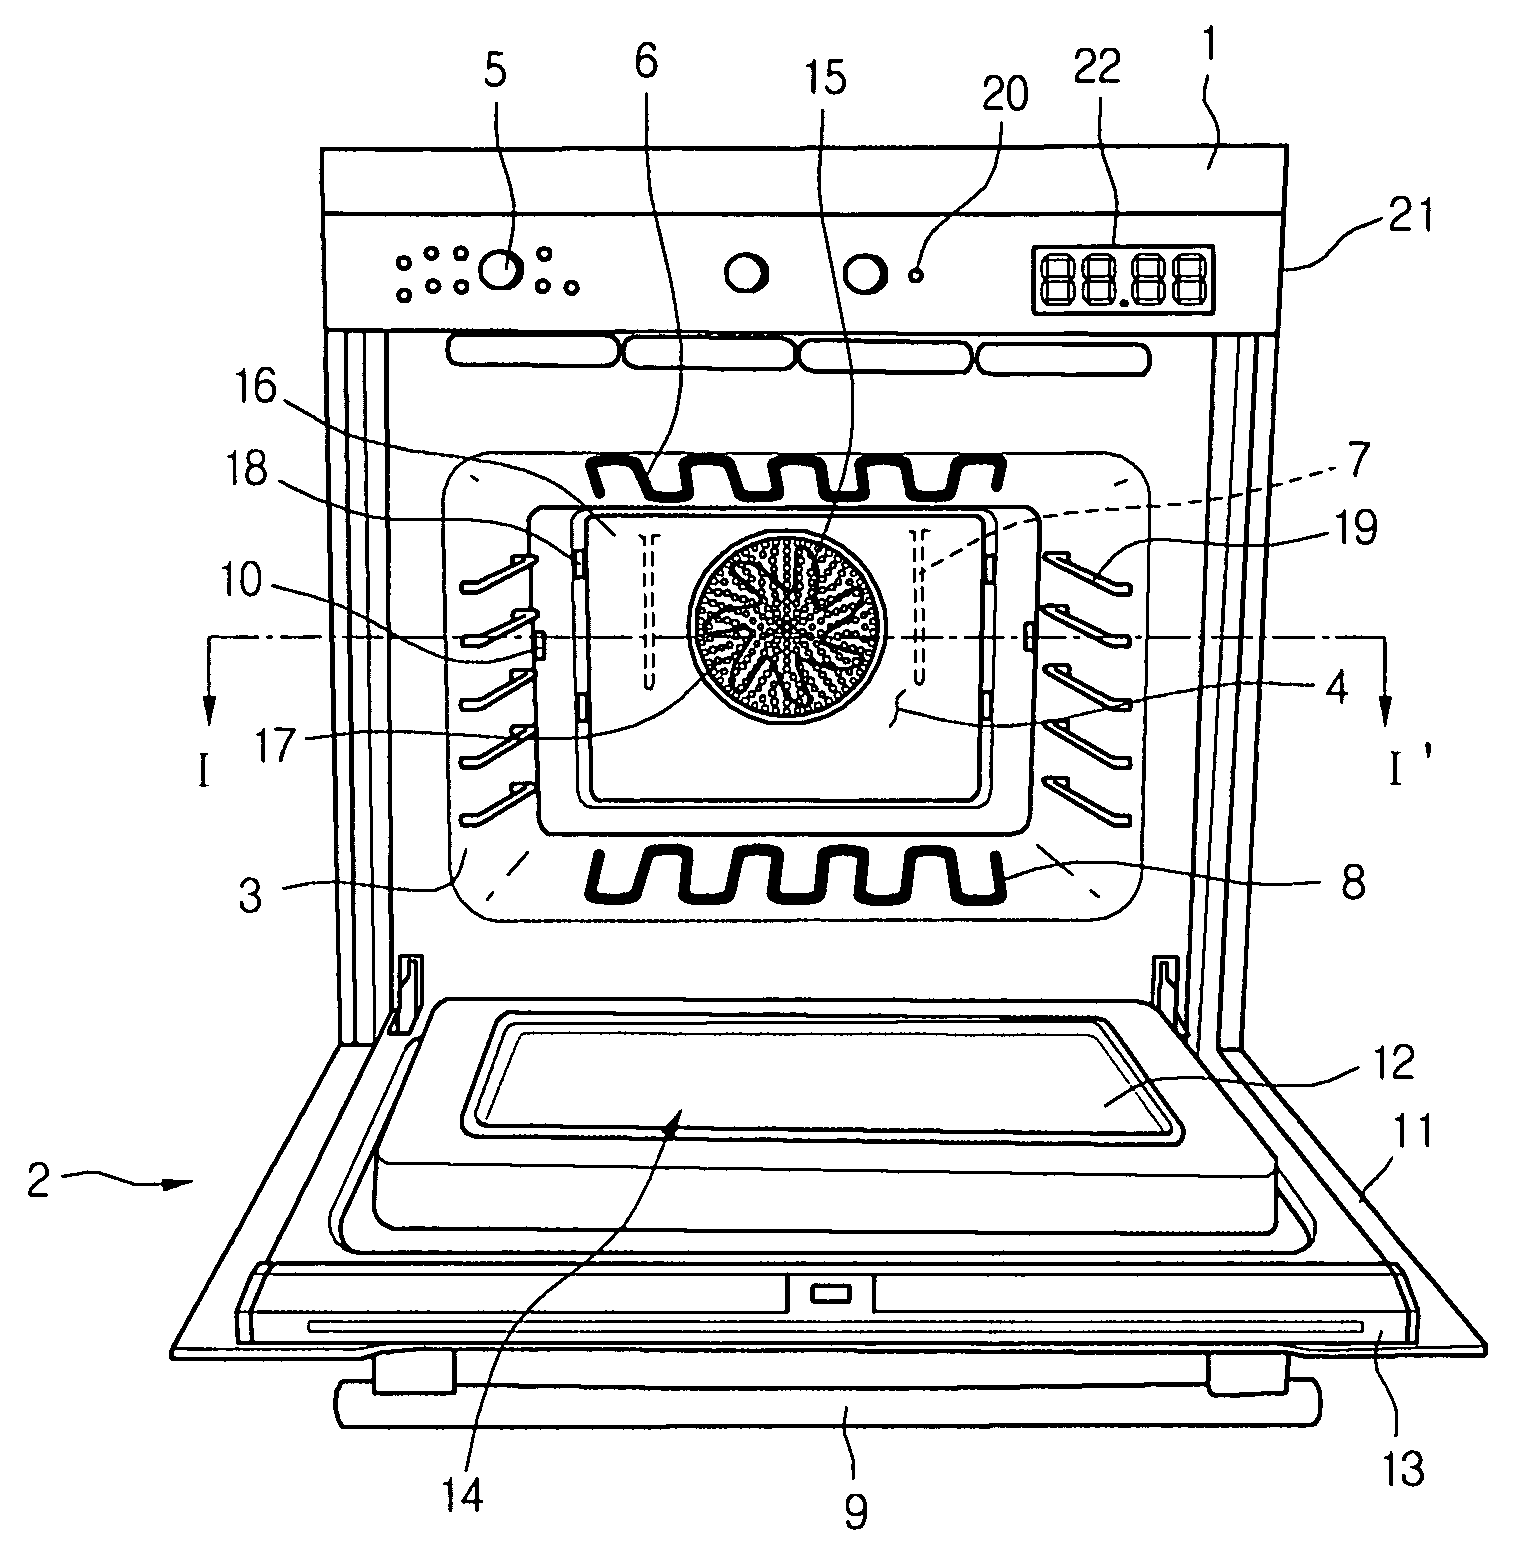 Oven and heating unit of oven